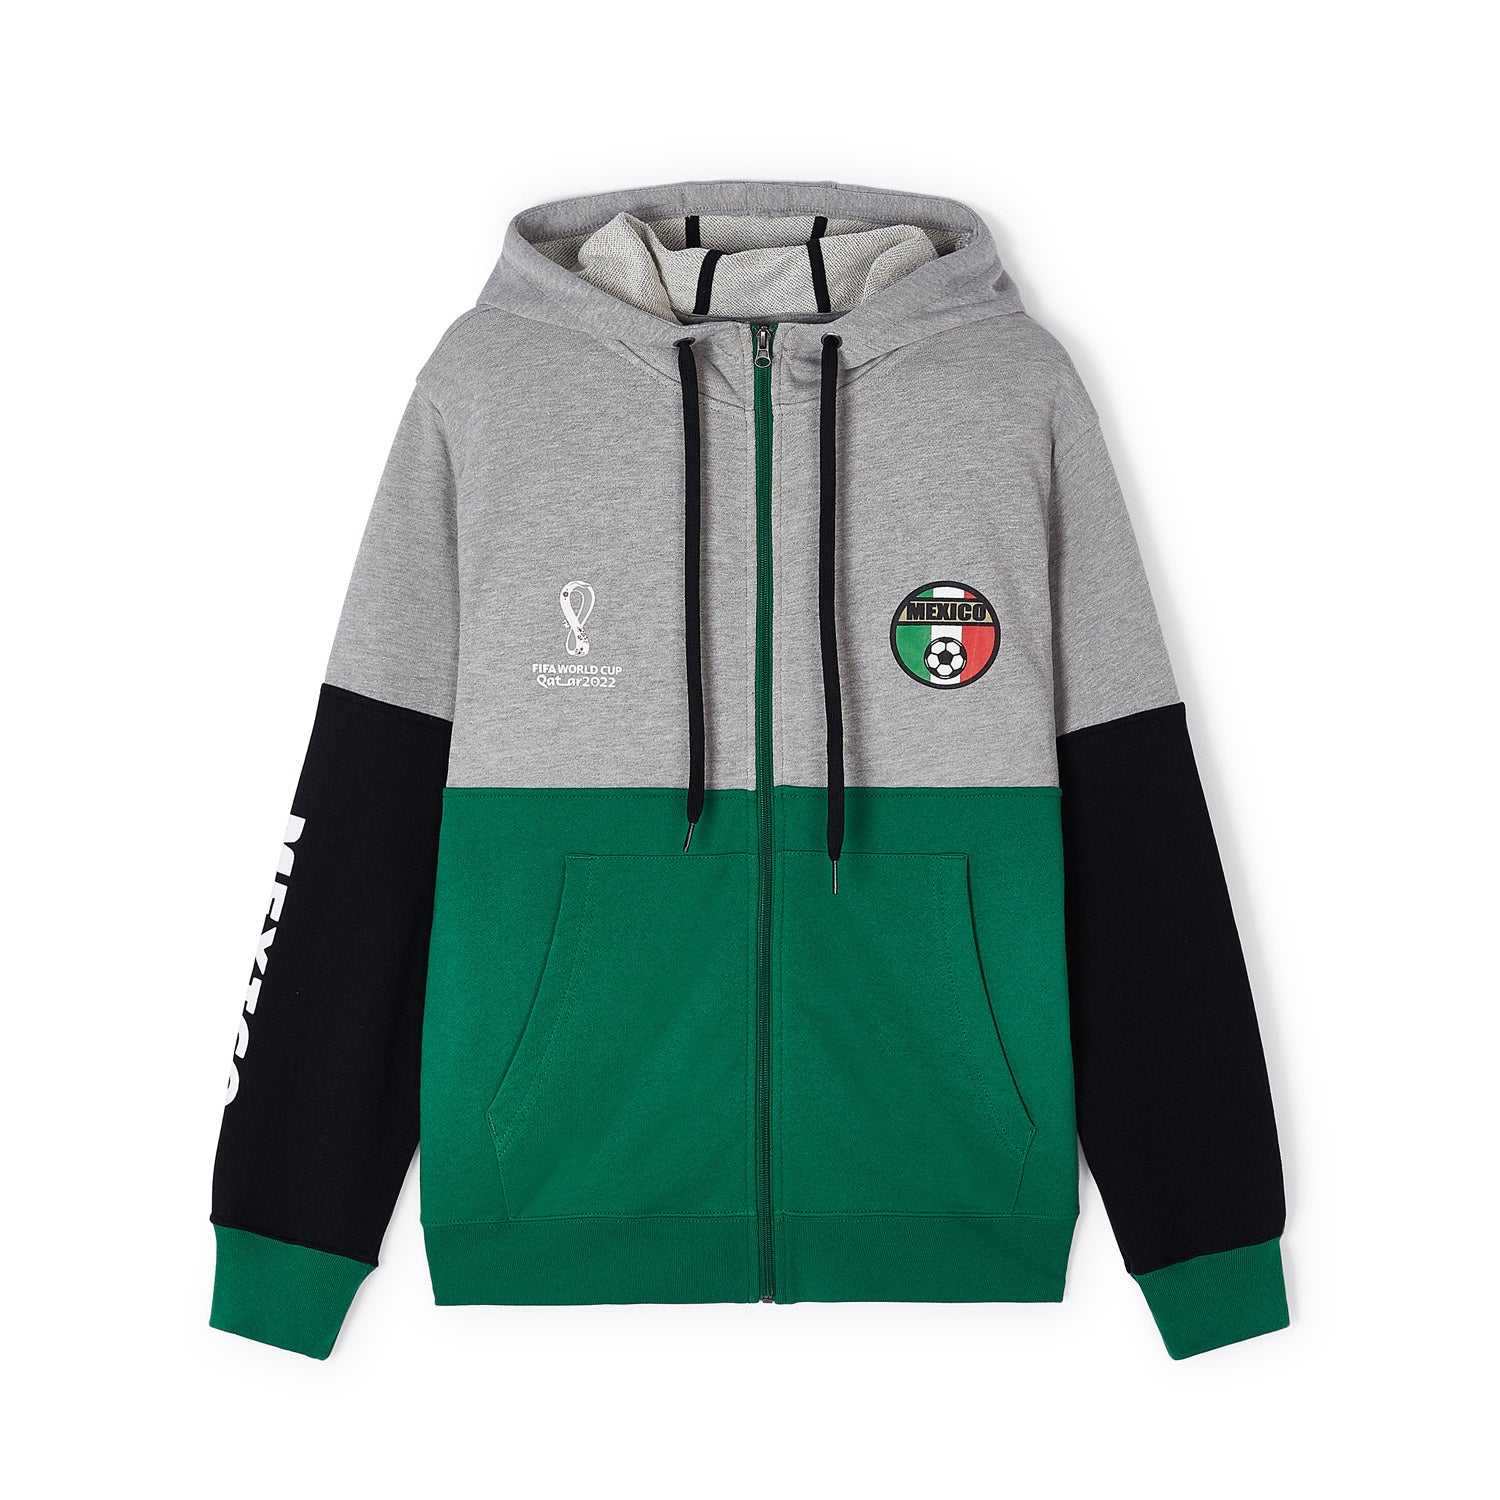 2022 World Cup Mexico Contrast Green Hoodie - Men's